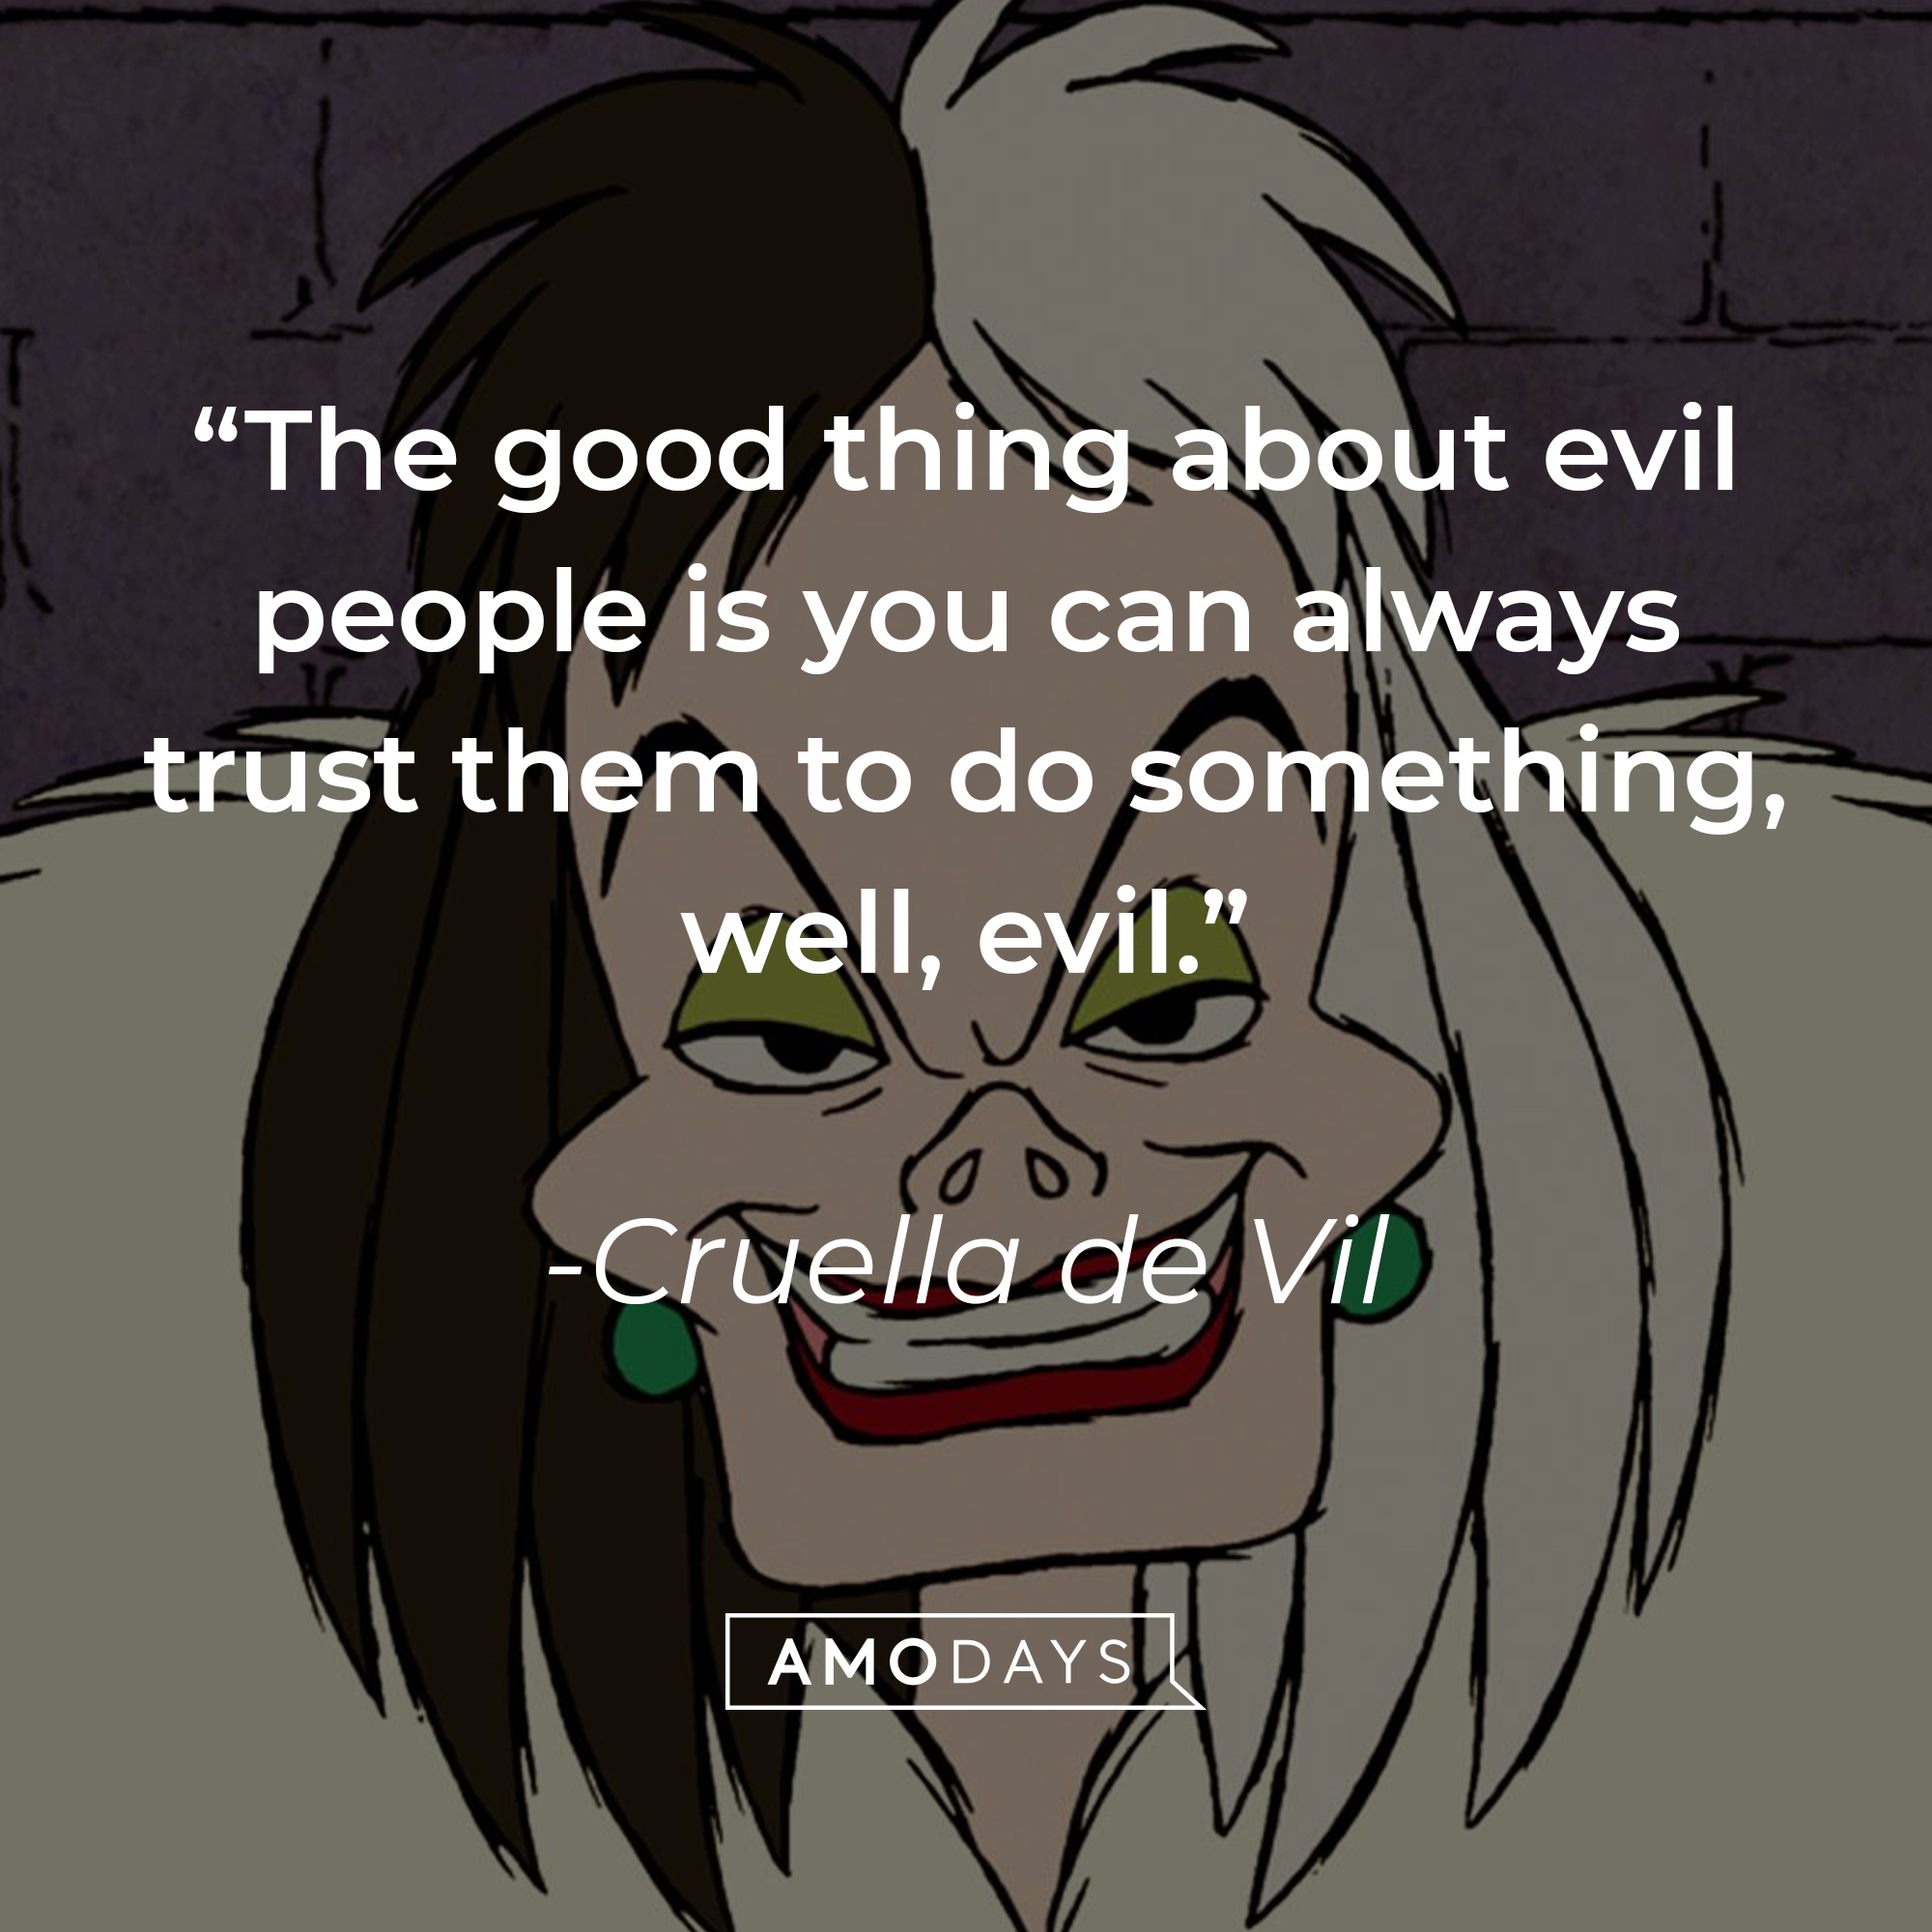 An image of the animated Cruella de Vil, with a quote from the same adapted character in the 2021 film “Cruella”: “The good thing about evil people is you can always trust them to do something, well, evil.” |  Source: Facebook.com/DisneyCruellaDeVil